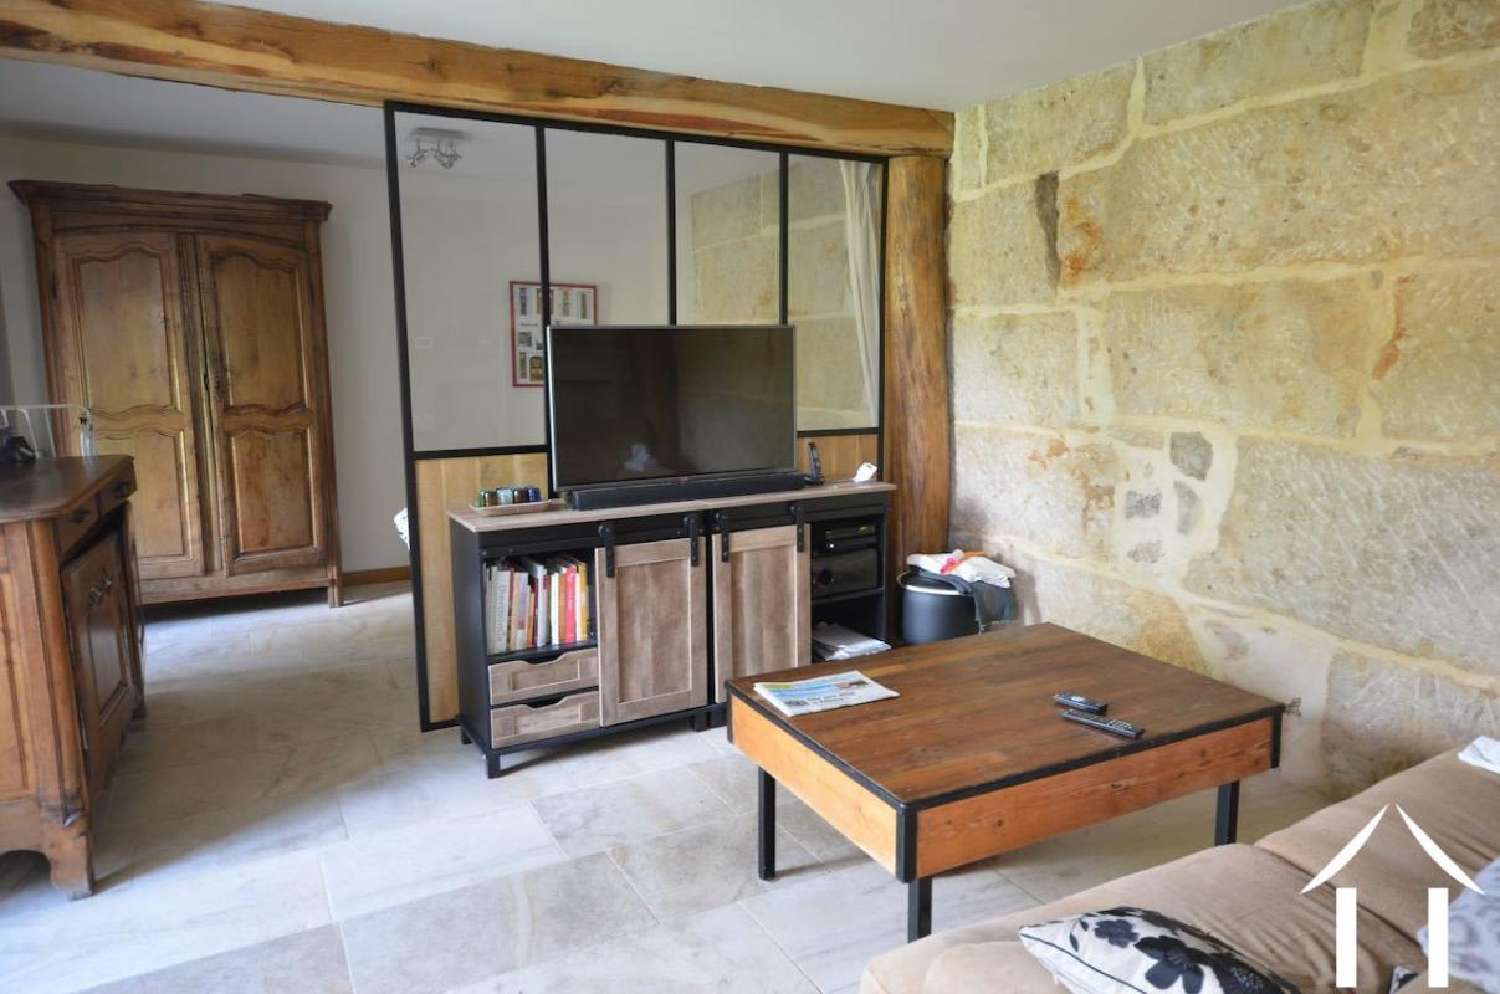  for sale bed and breakfast Aignay-le-Duc Côte-d'Or 6